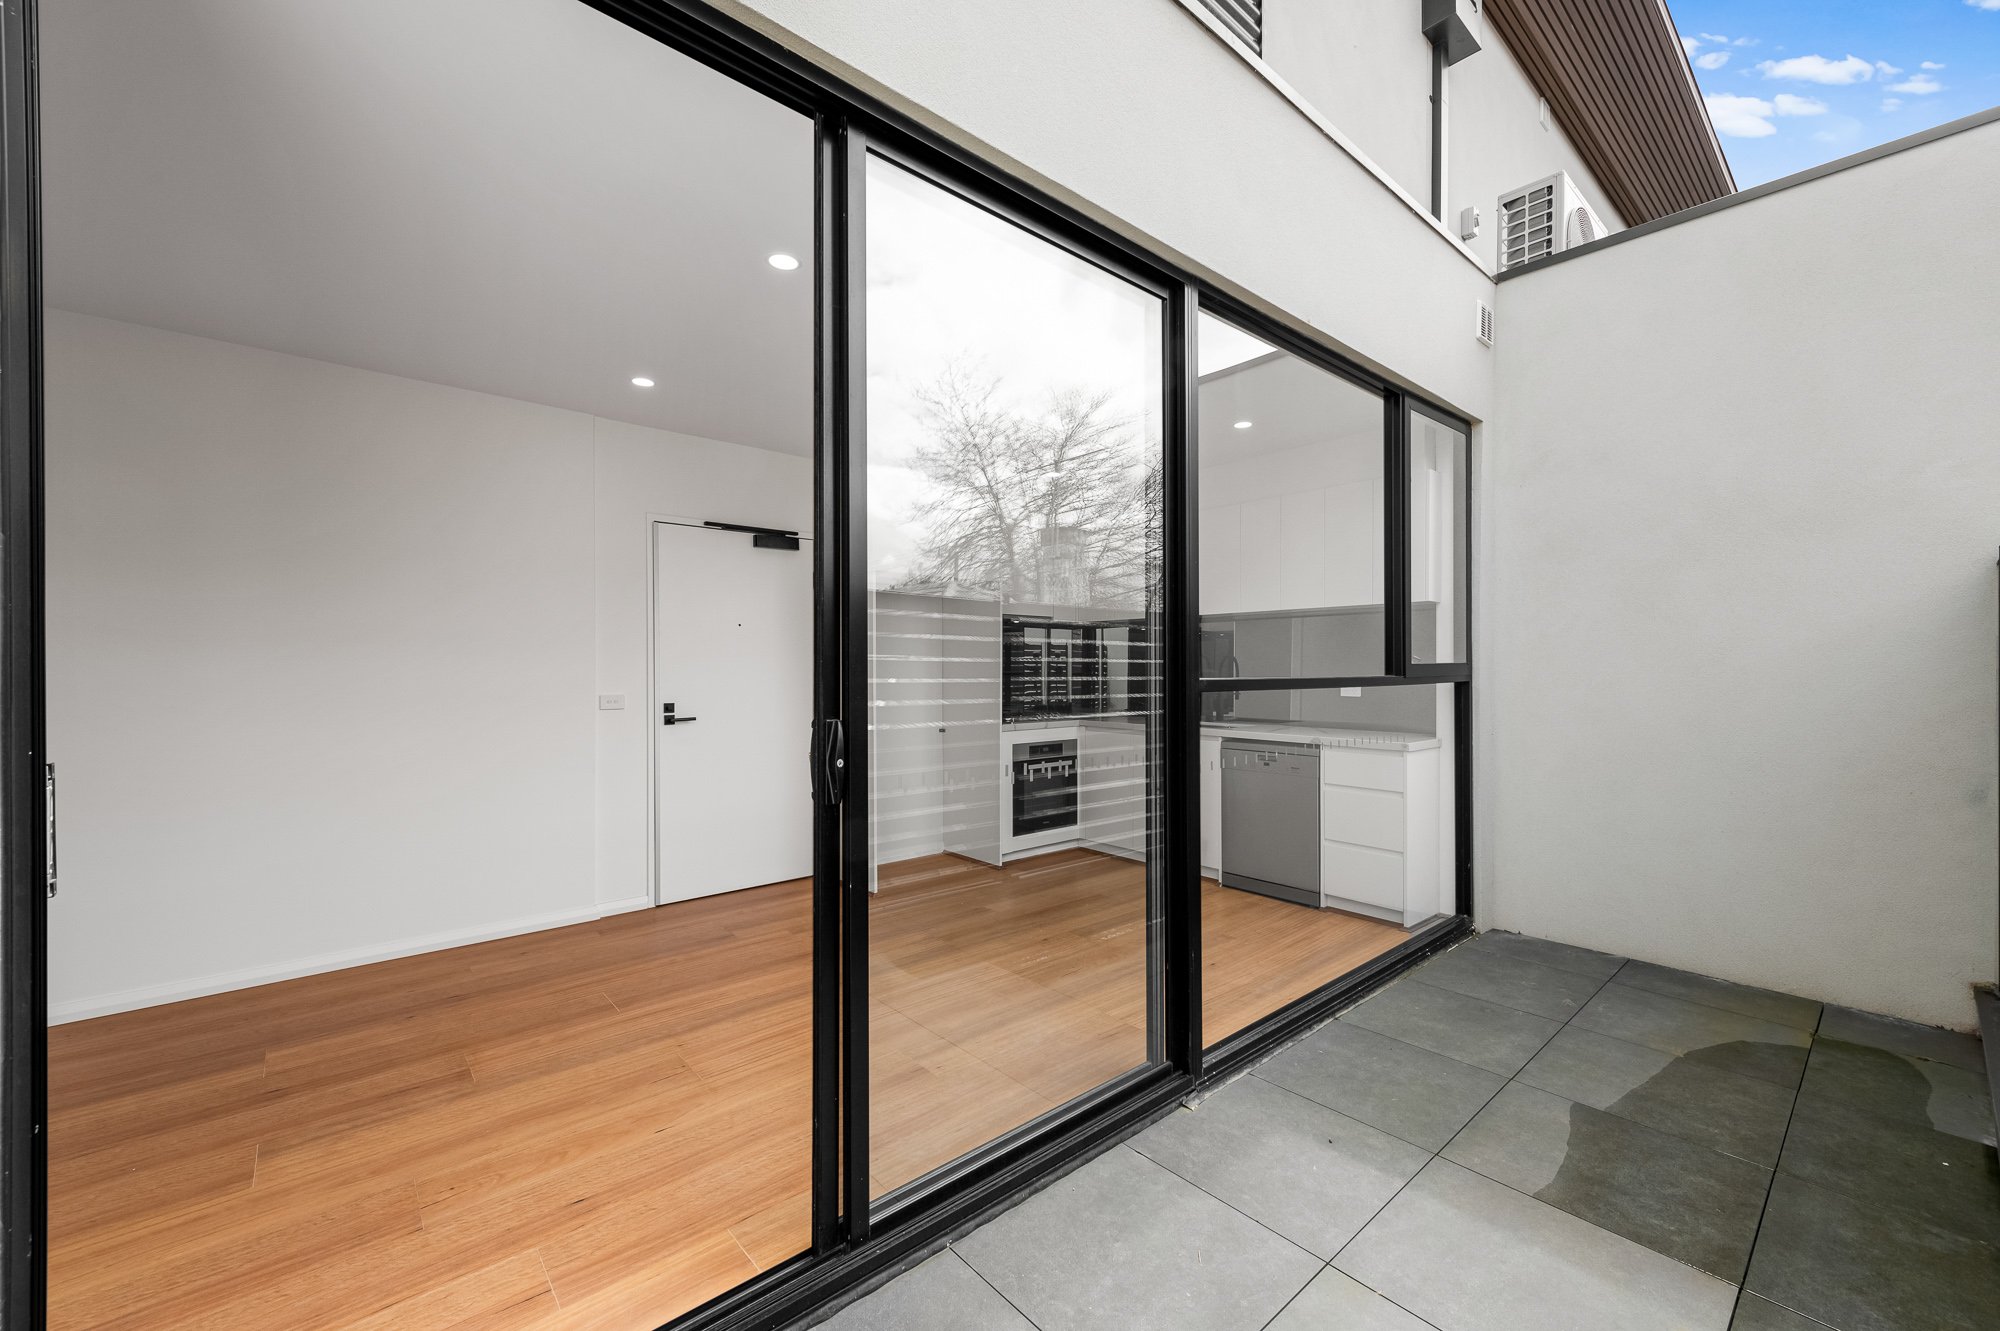 Camberwell - 1282 Toorak Road, Camberwell, VIC 3124 - Townly - 6.jpg